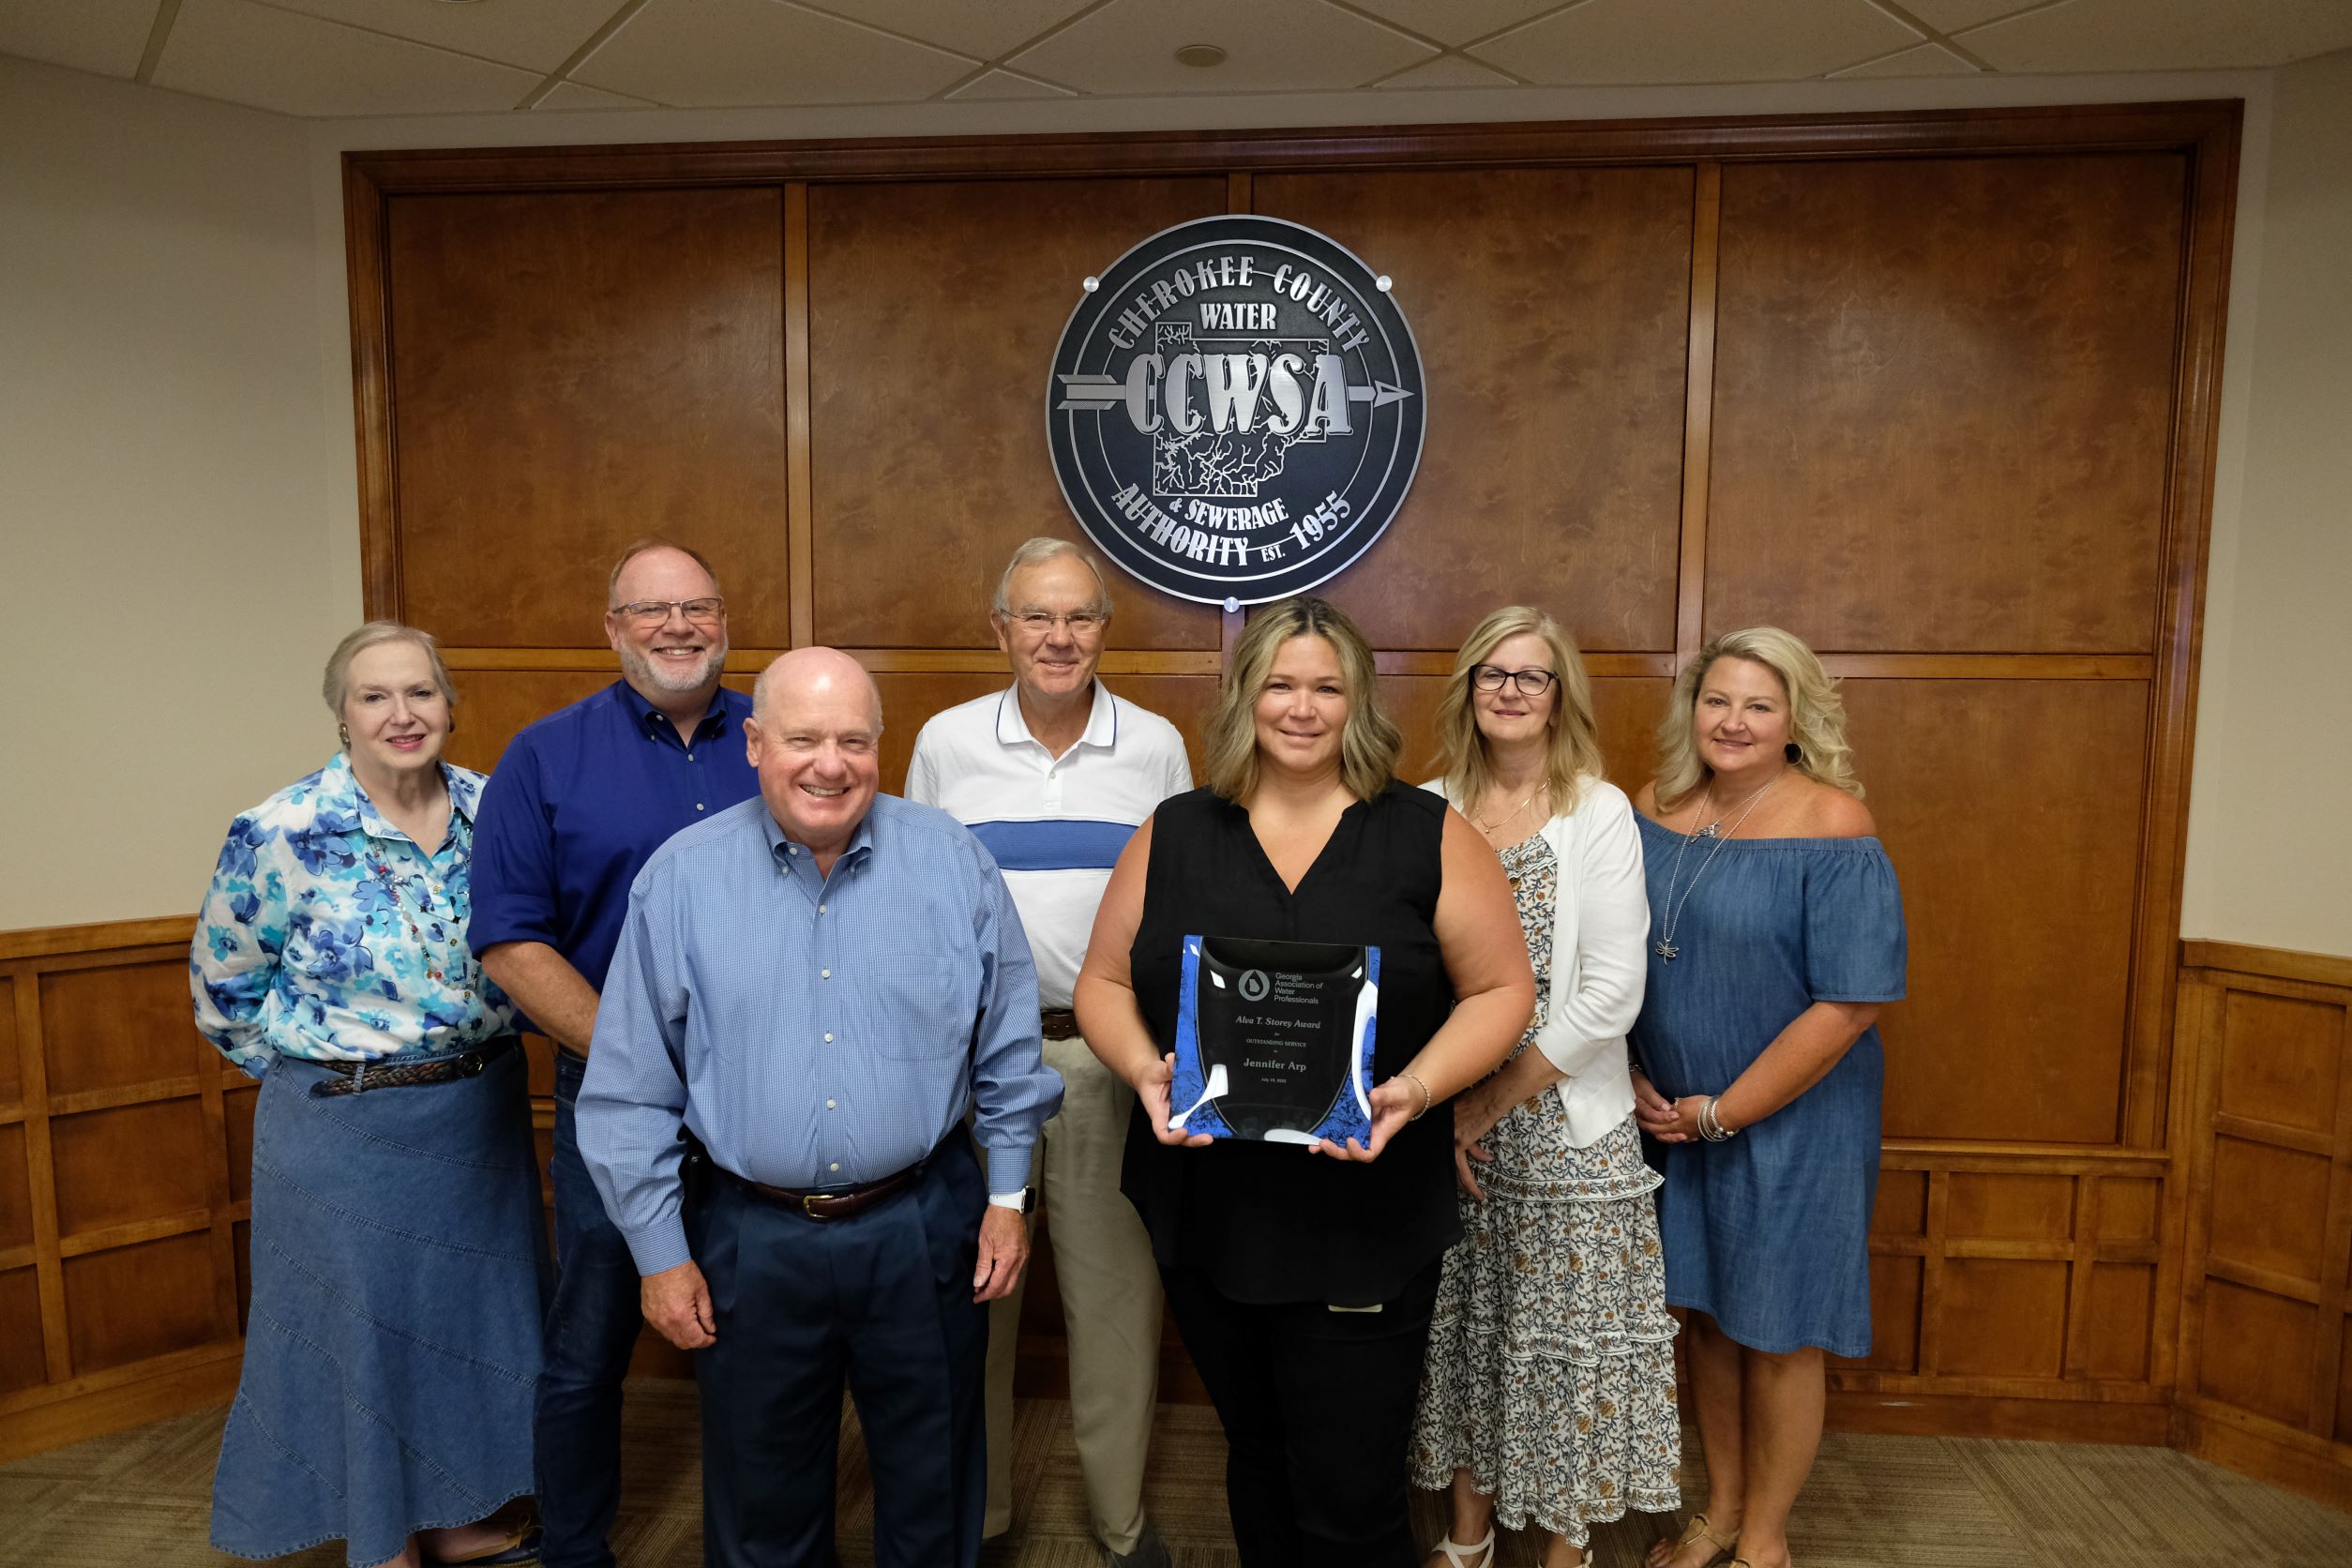 Jennifer Arp, Environmental Affairs' Assistant Manager, received the Georgia Association of Water Professionals (GAWP) Alva T. Storey Award at the Annual conference in Savannah in July 2022.